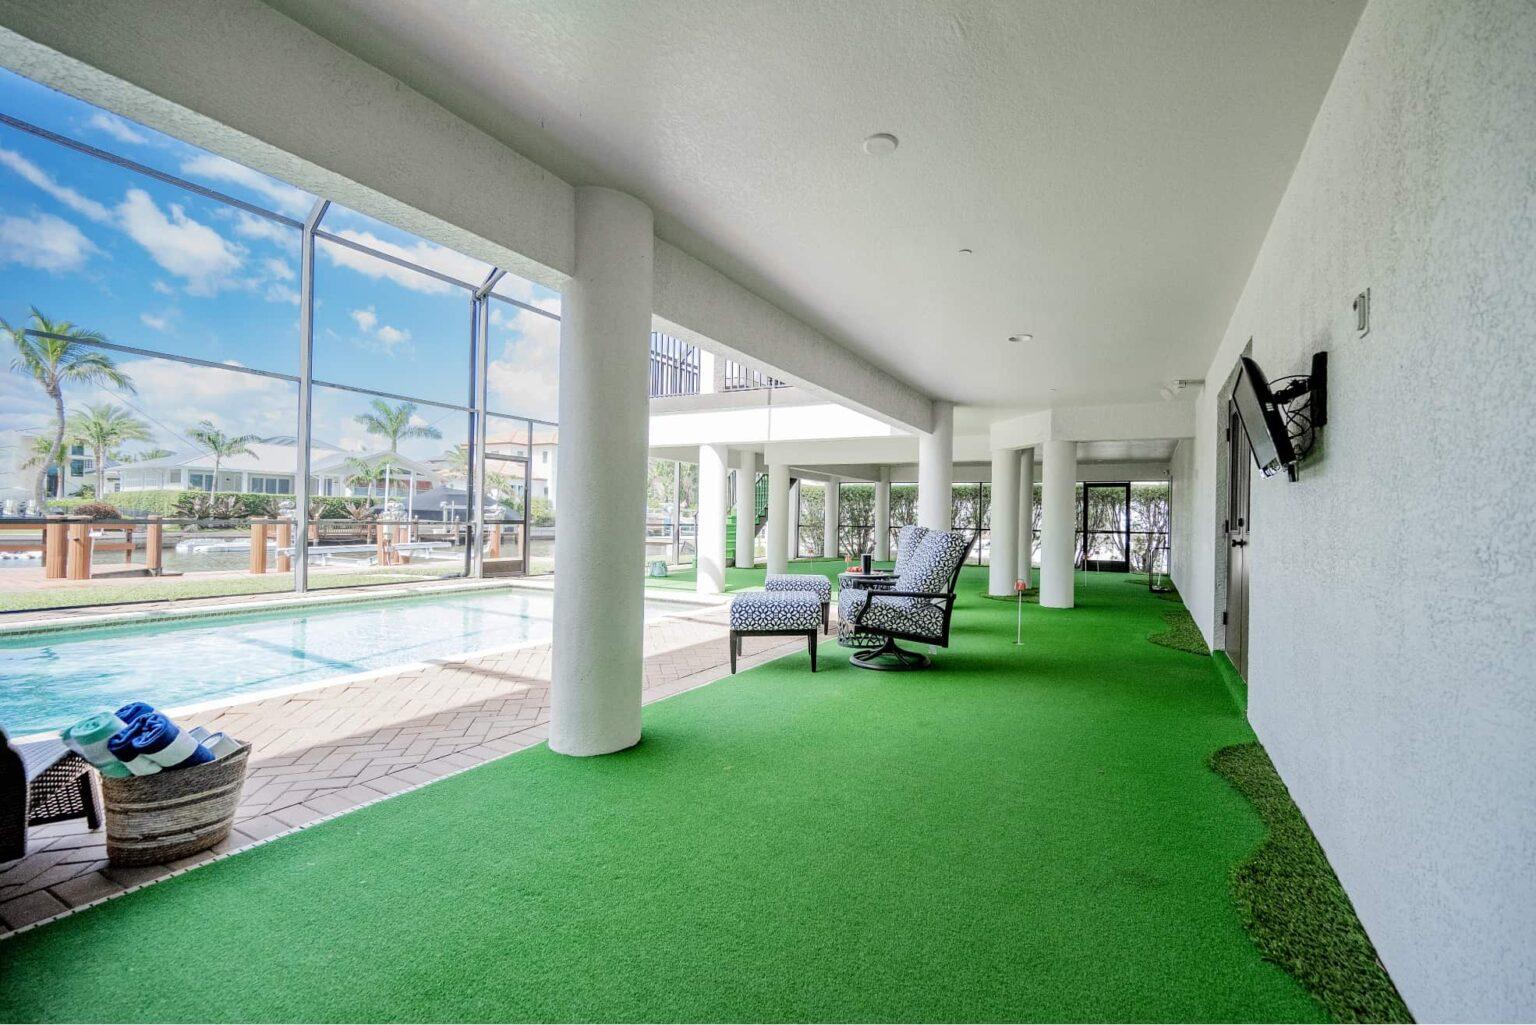 naples fl vacation home 9 Hole Putting Green backyard pool and putting green